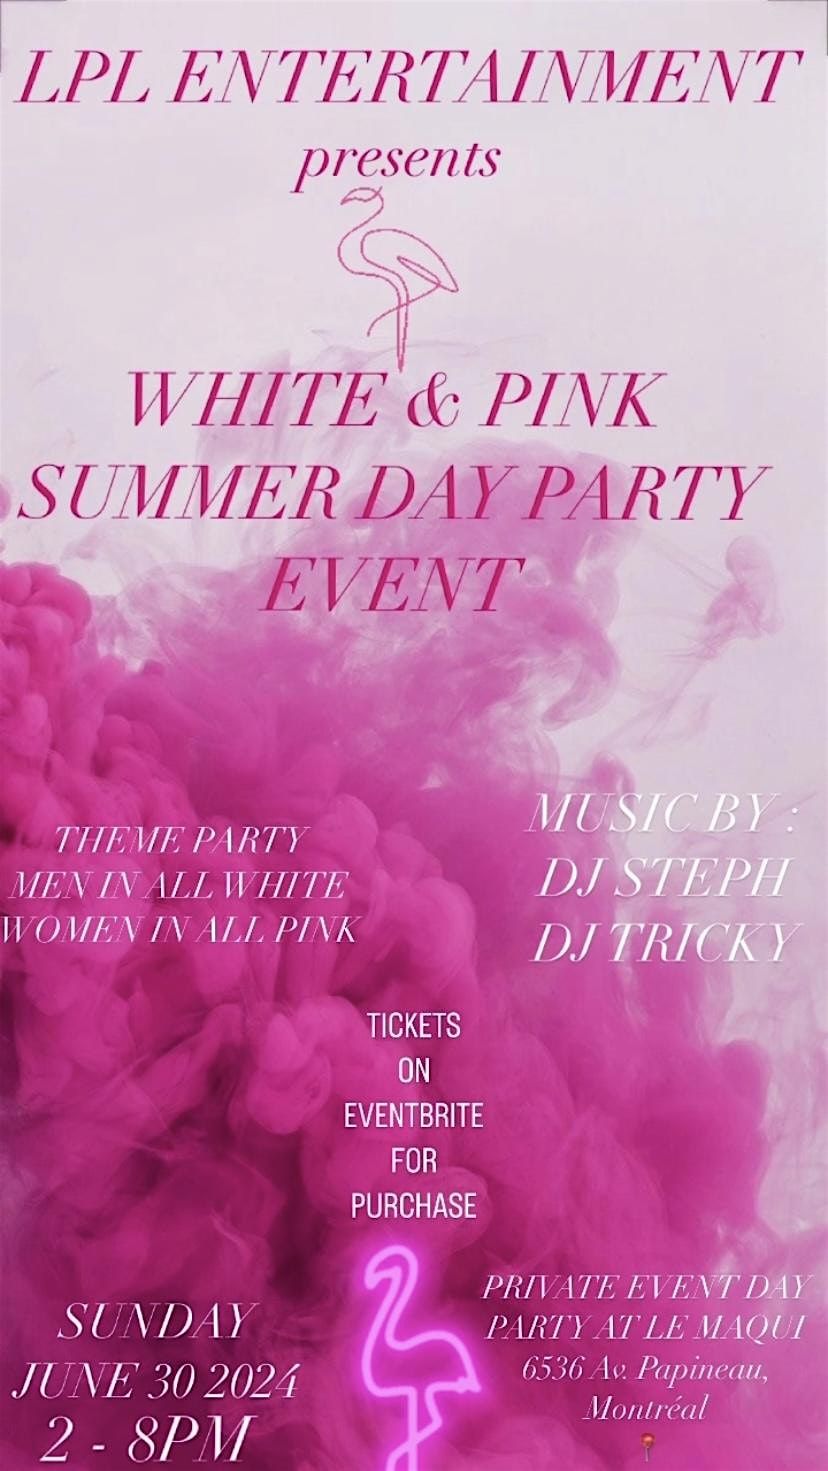 PINK & WHITE SUMMER DAY PARTY